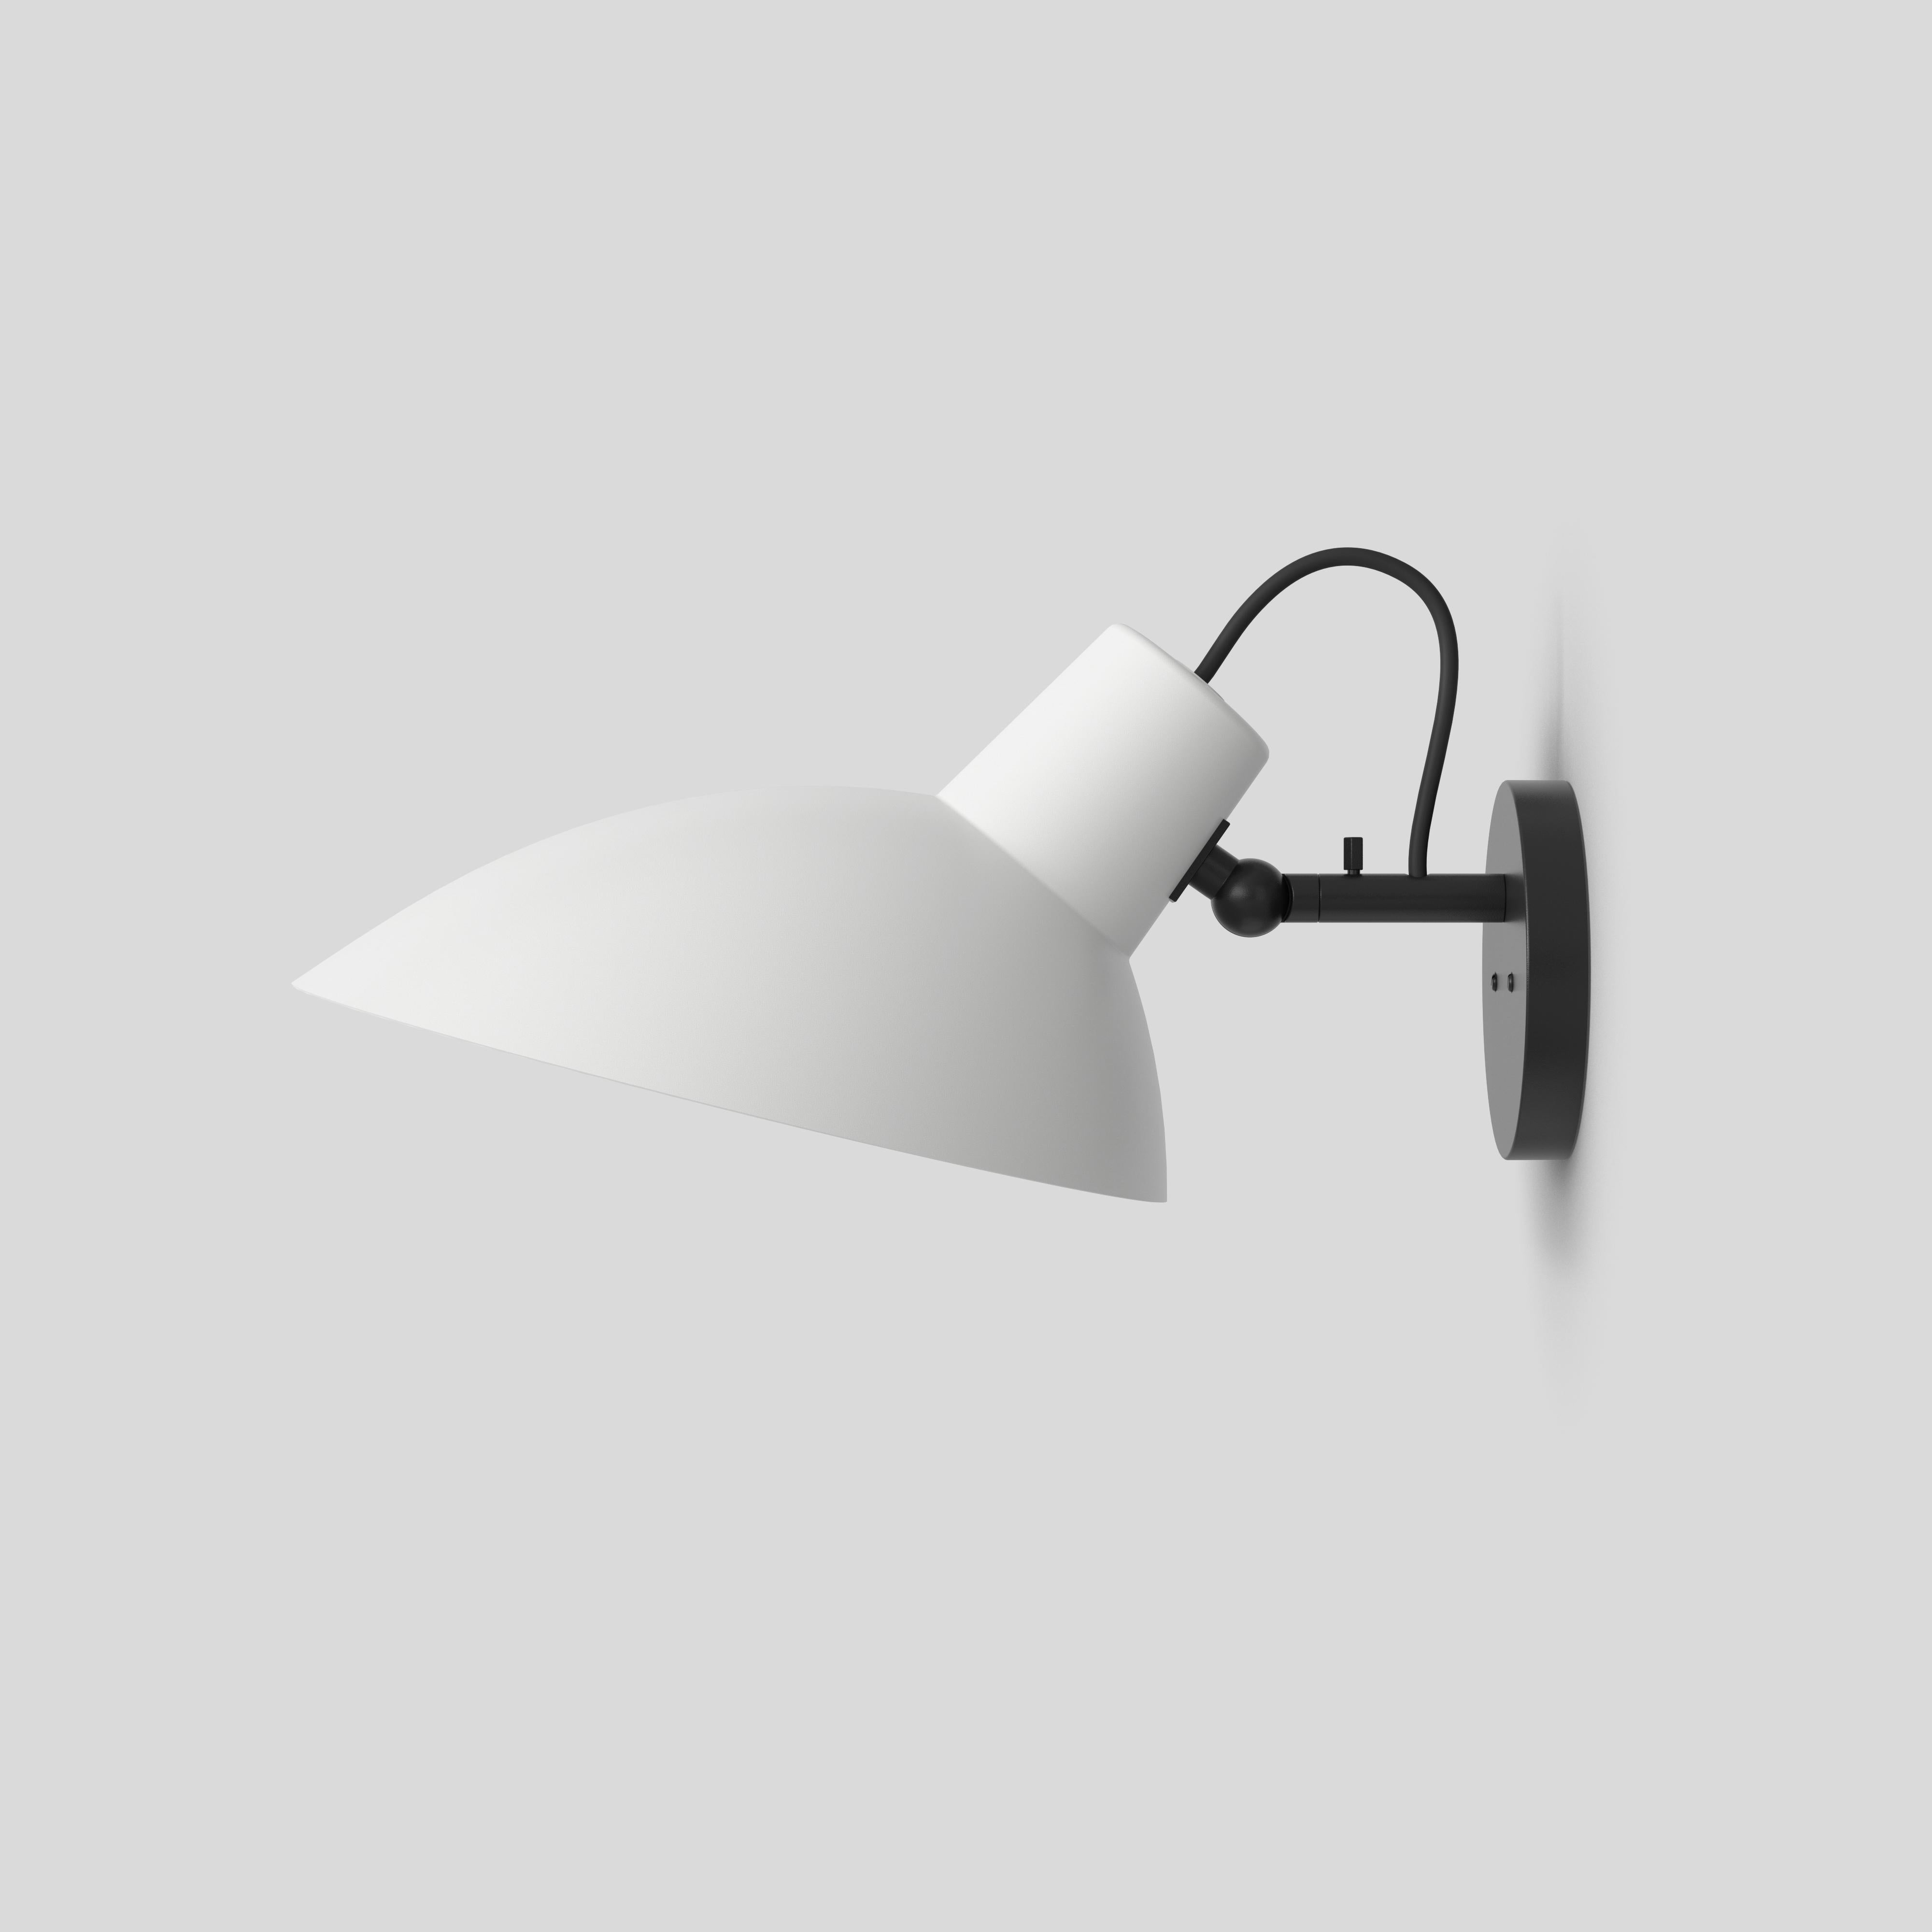 VV Cinquanta wall lamp
Design by Vittoriano Viganò
This version is with White Lacquered Reflector and Black Mount.

The VV Cinquanta features an elegant and versatile posable direct light source that can swivel and tilt. The Wall model is